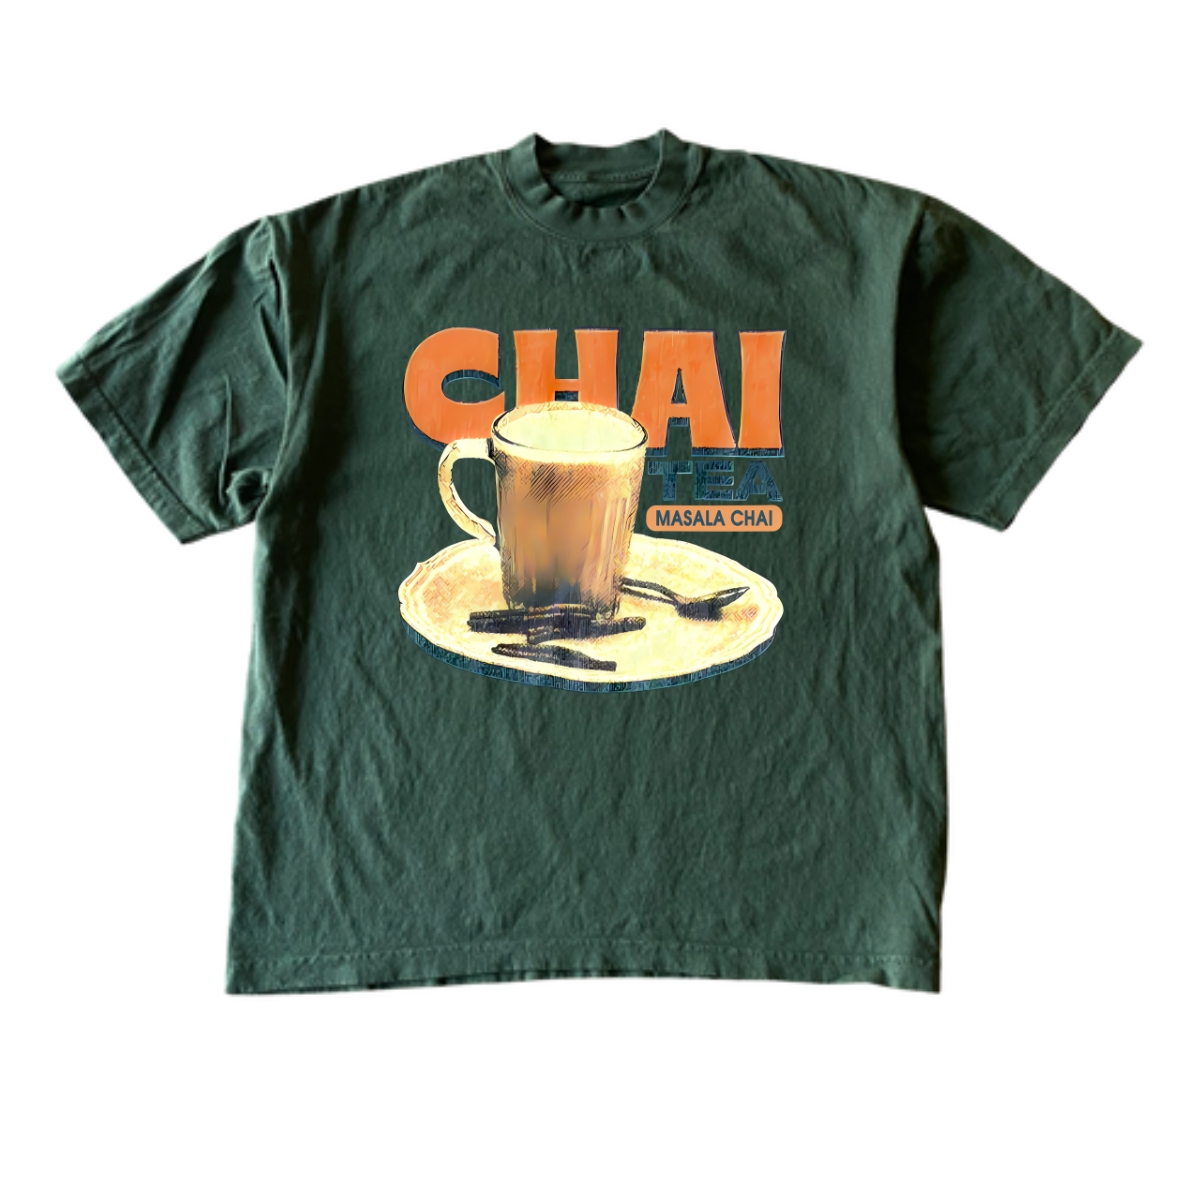 Chai Tea Tee Shirt Outfit, Gift for Men, Women And Young N106